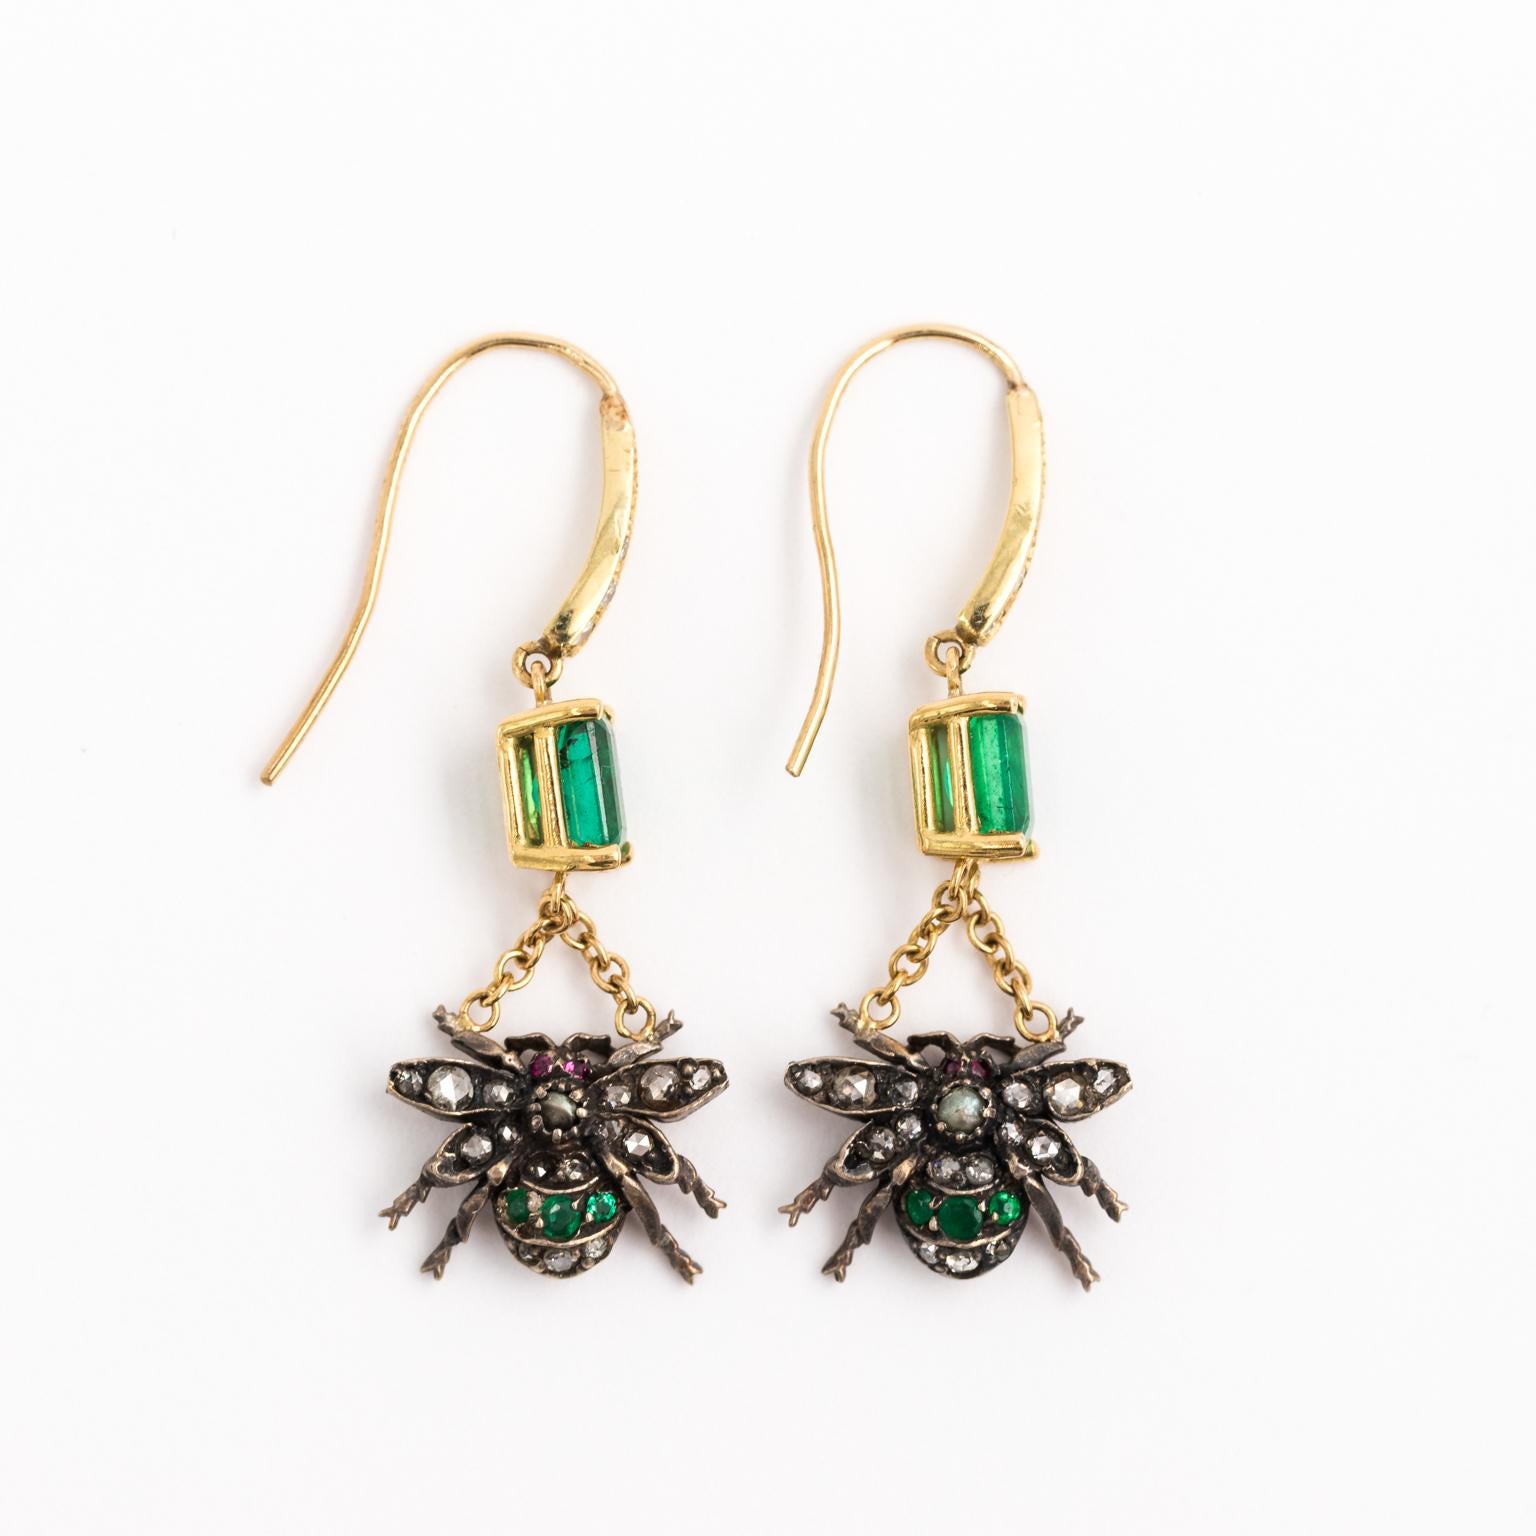 18 Karat Yellow Gold and Sterling Silver fly shaped earrings with 1.40 carat Emerald cut Columbian emeralds with rose cut Diamond, Ruby, and seed Pearl.
